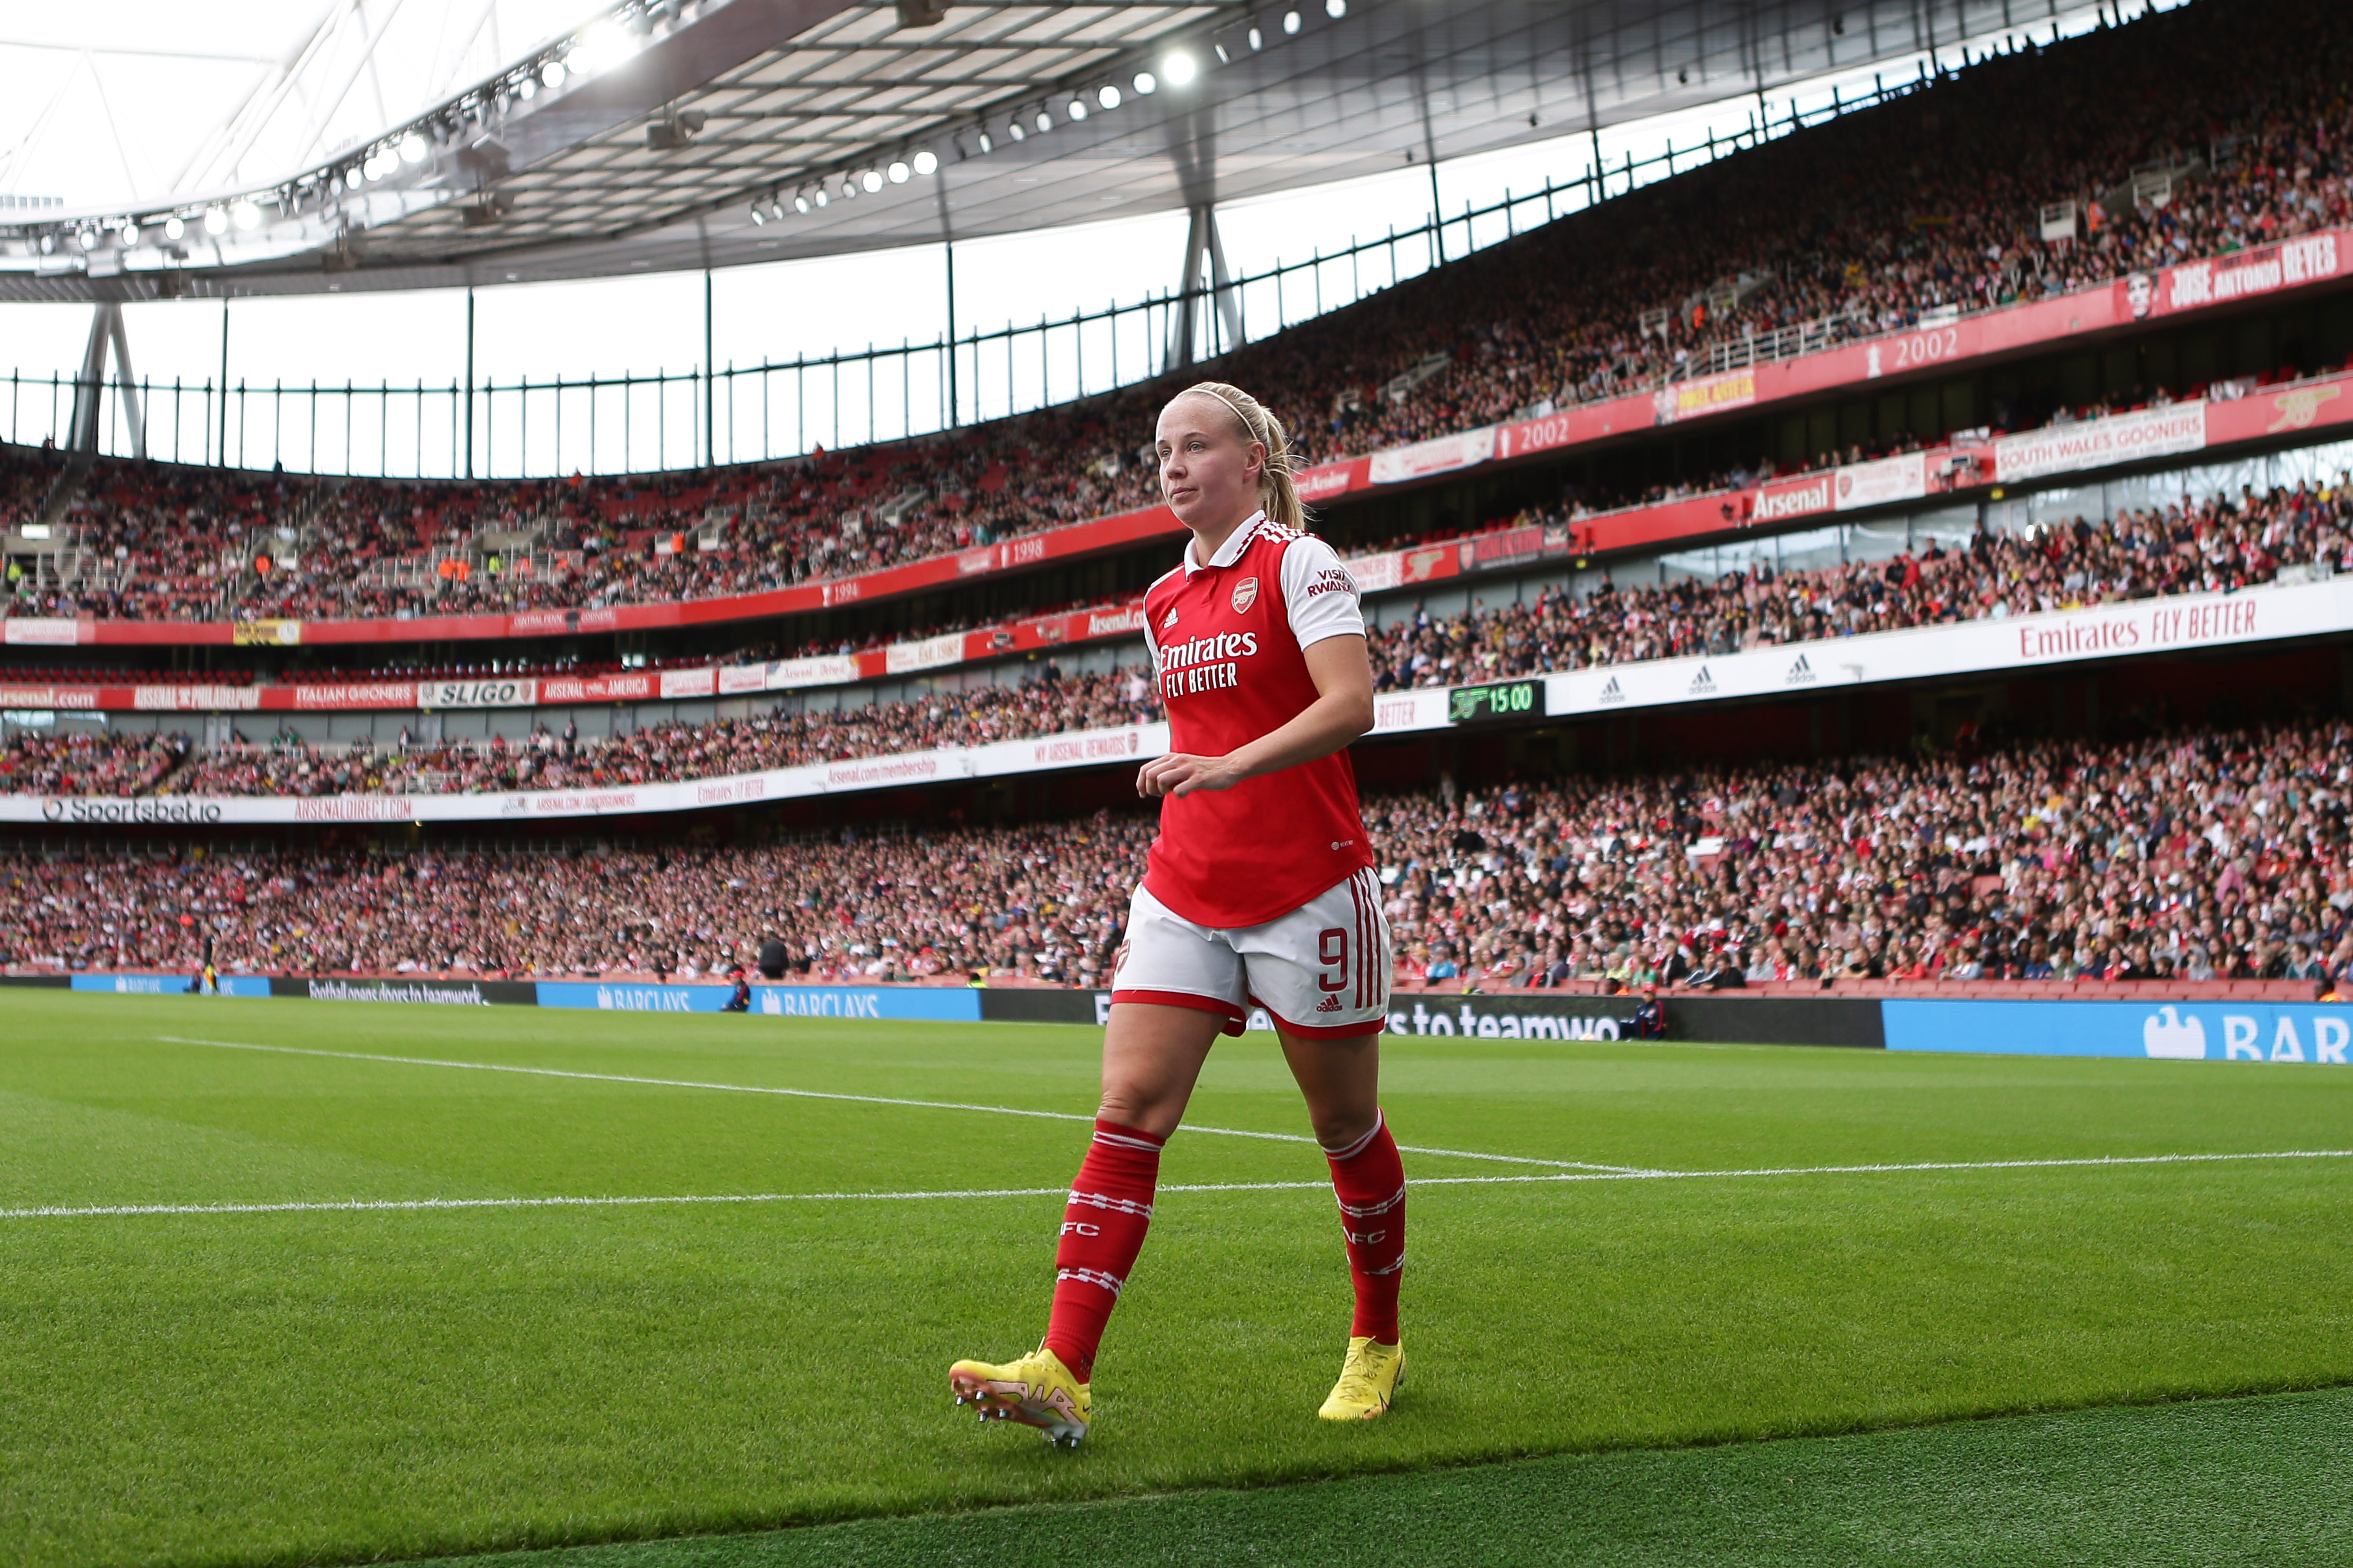 Second place for Arsenal’s Beth Mead who makes Arsenal history with Ballon d’Or runners-up award